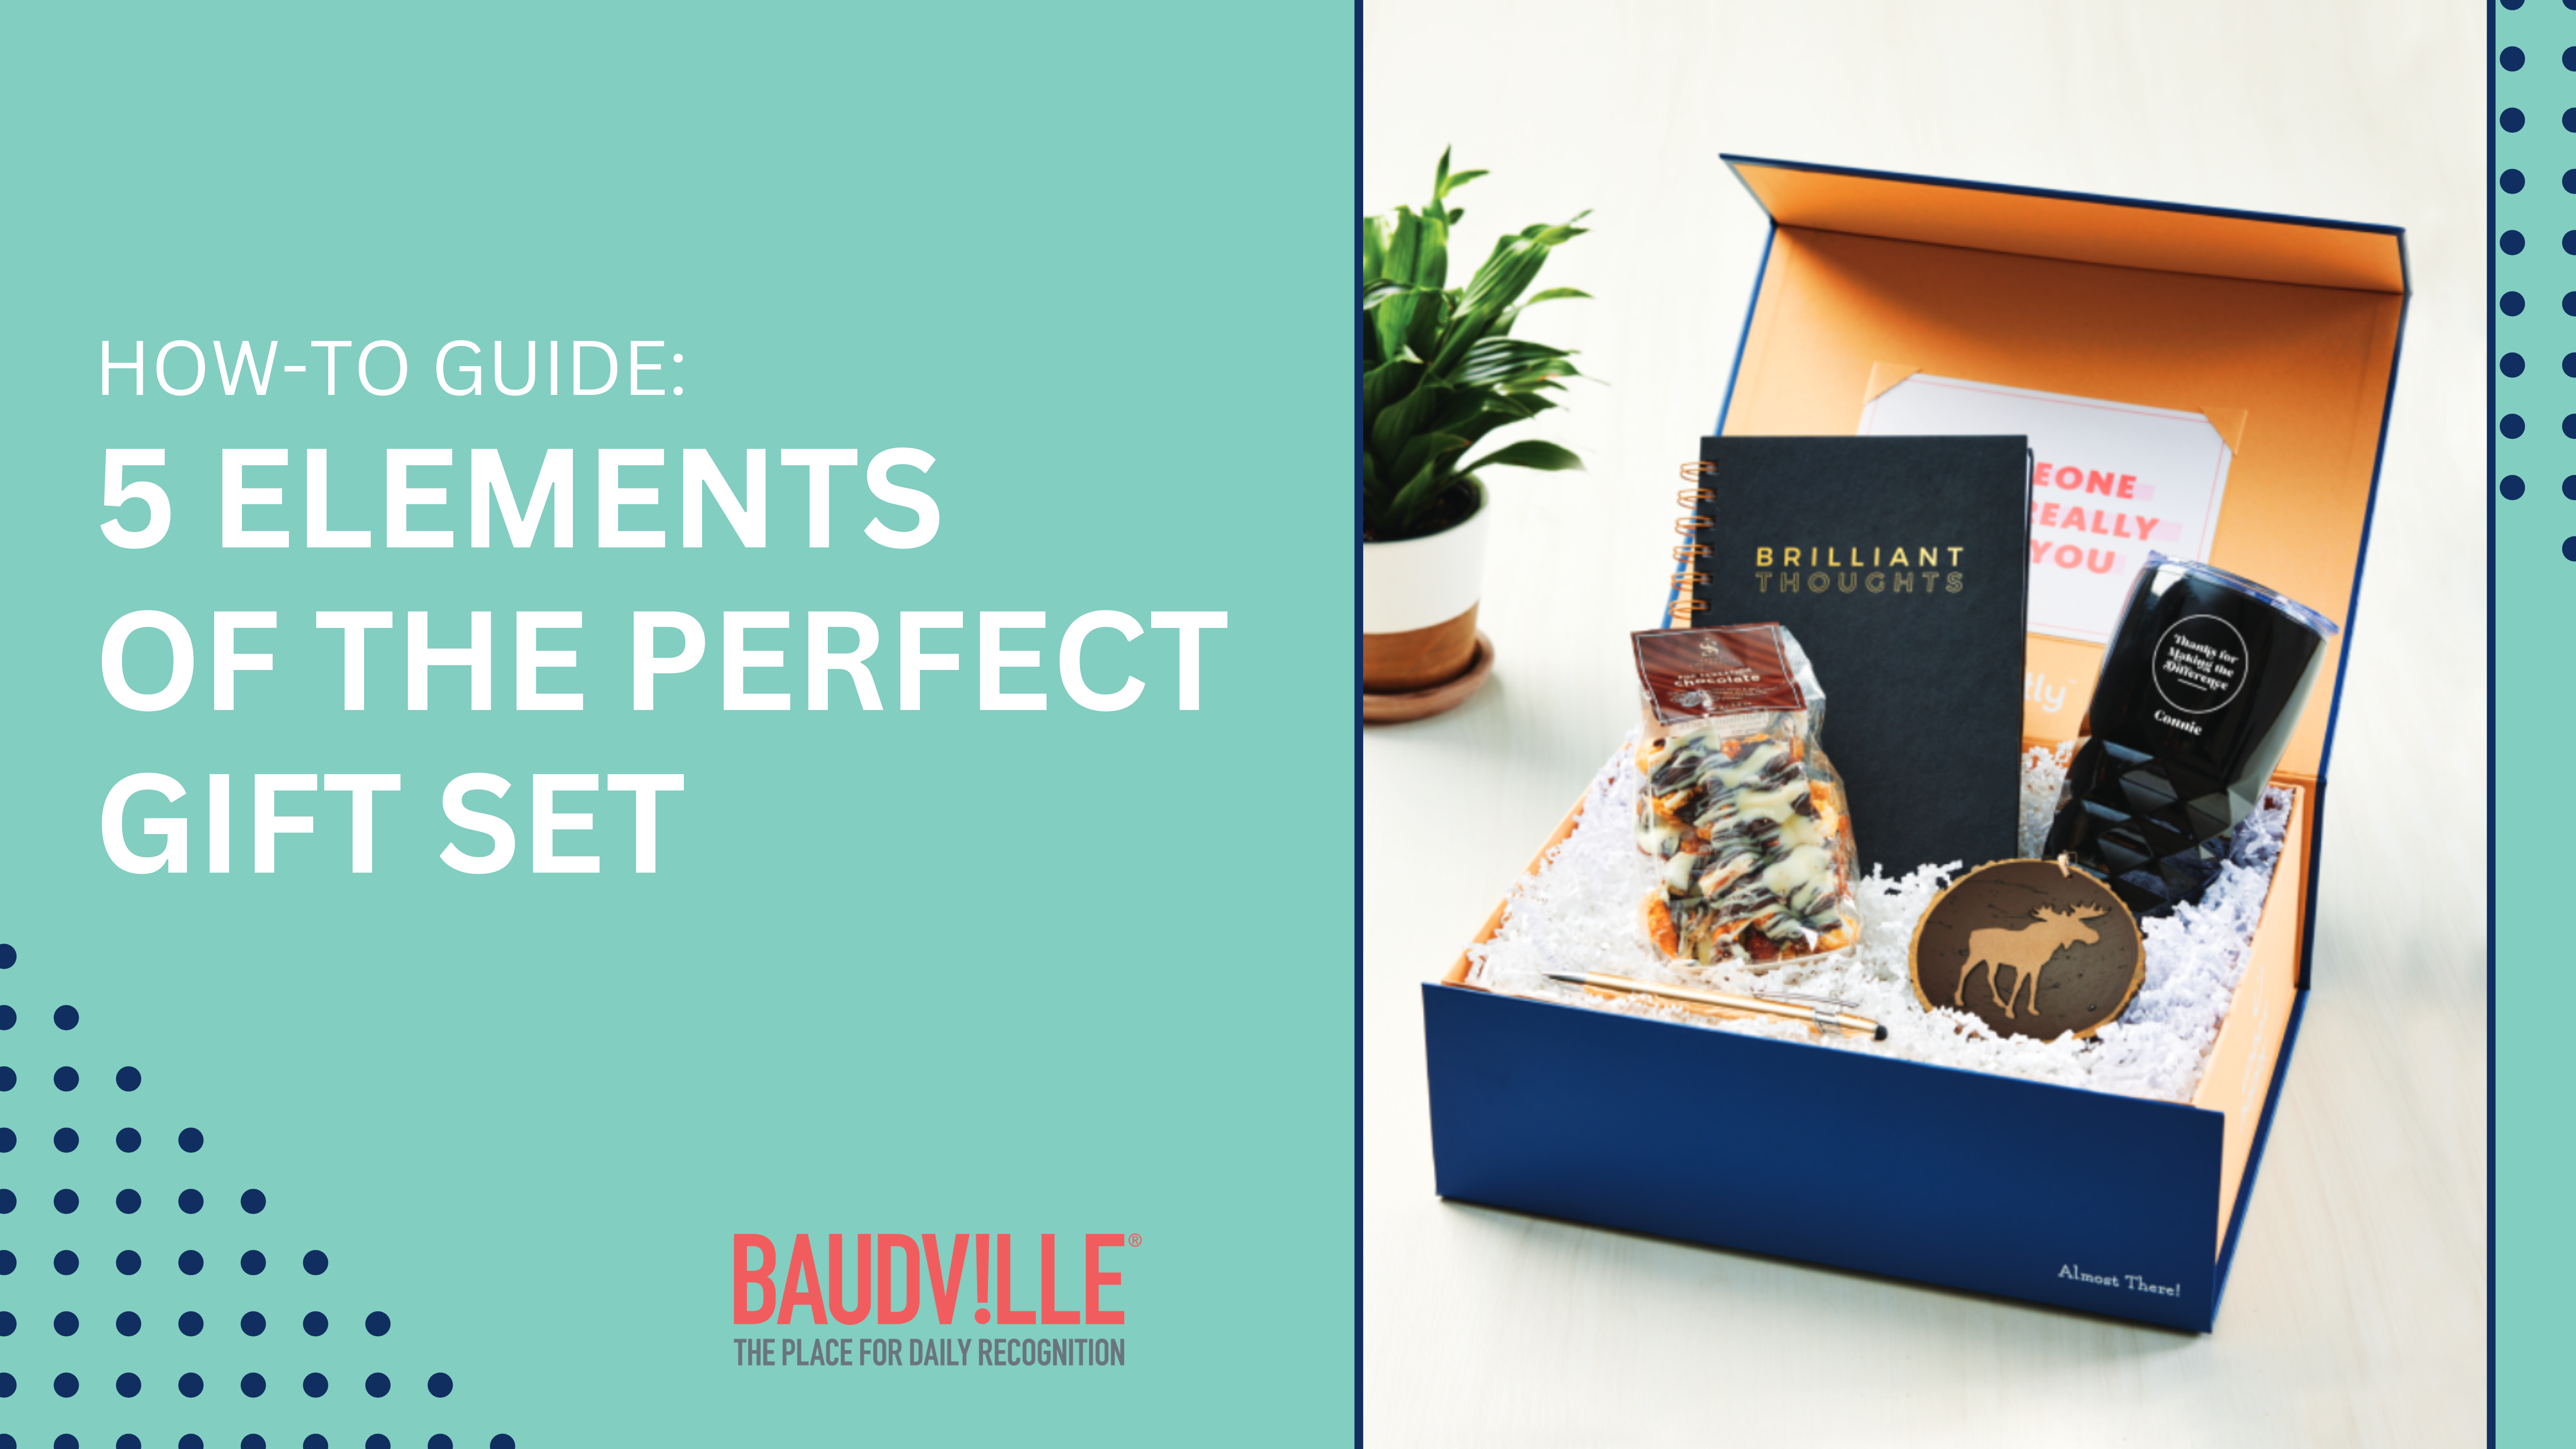 5 elements of the perfect gift set